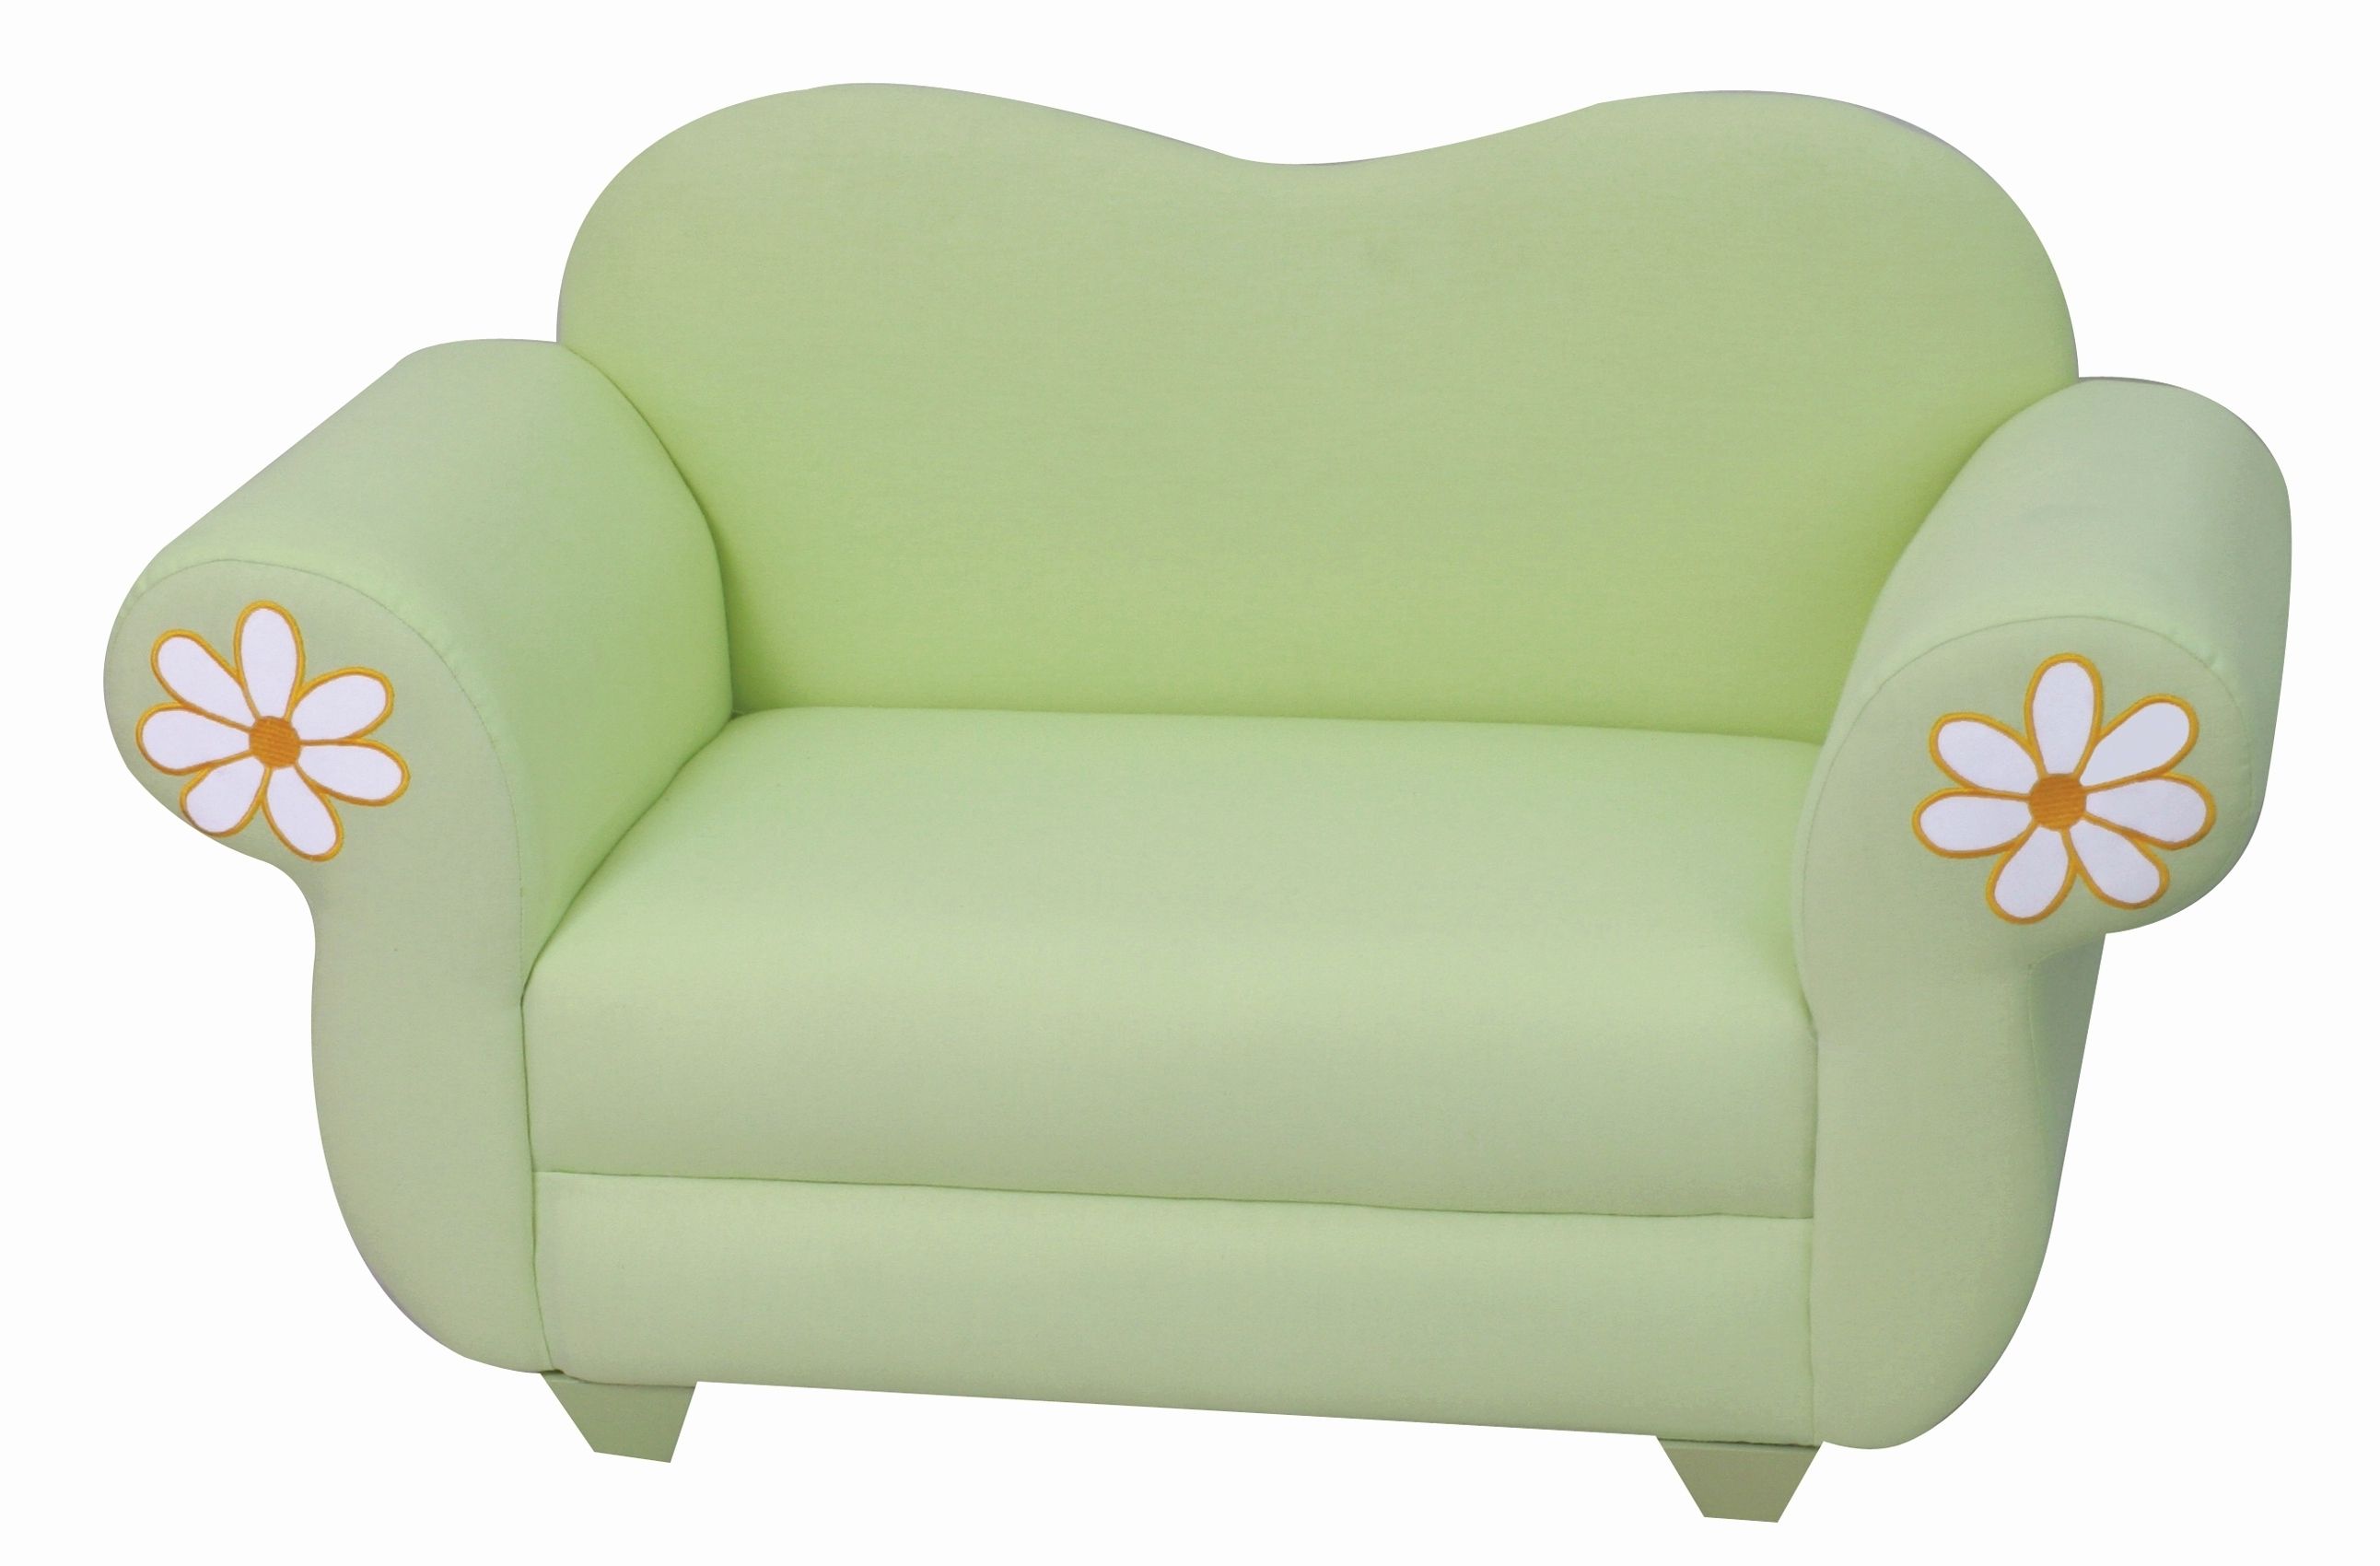 sofa chairs for children